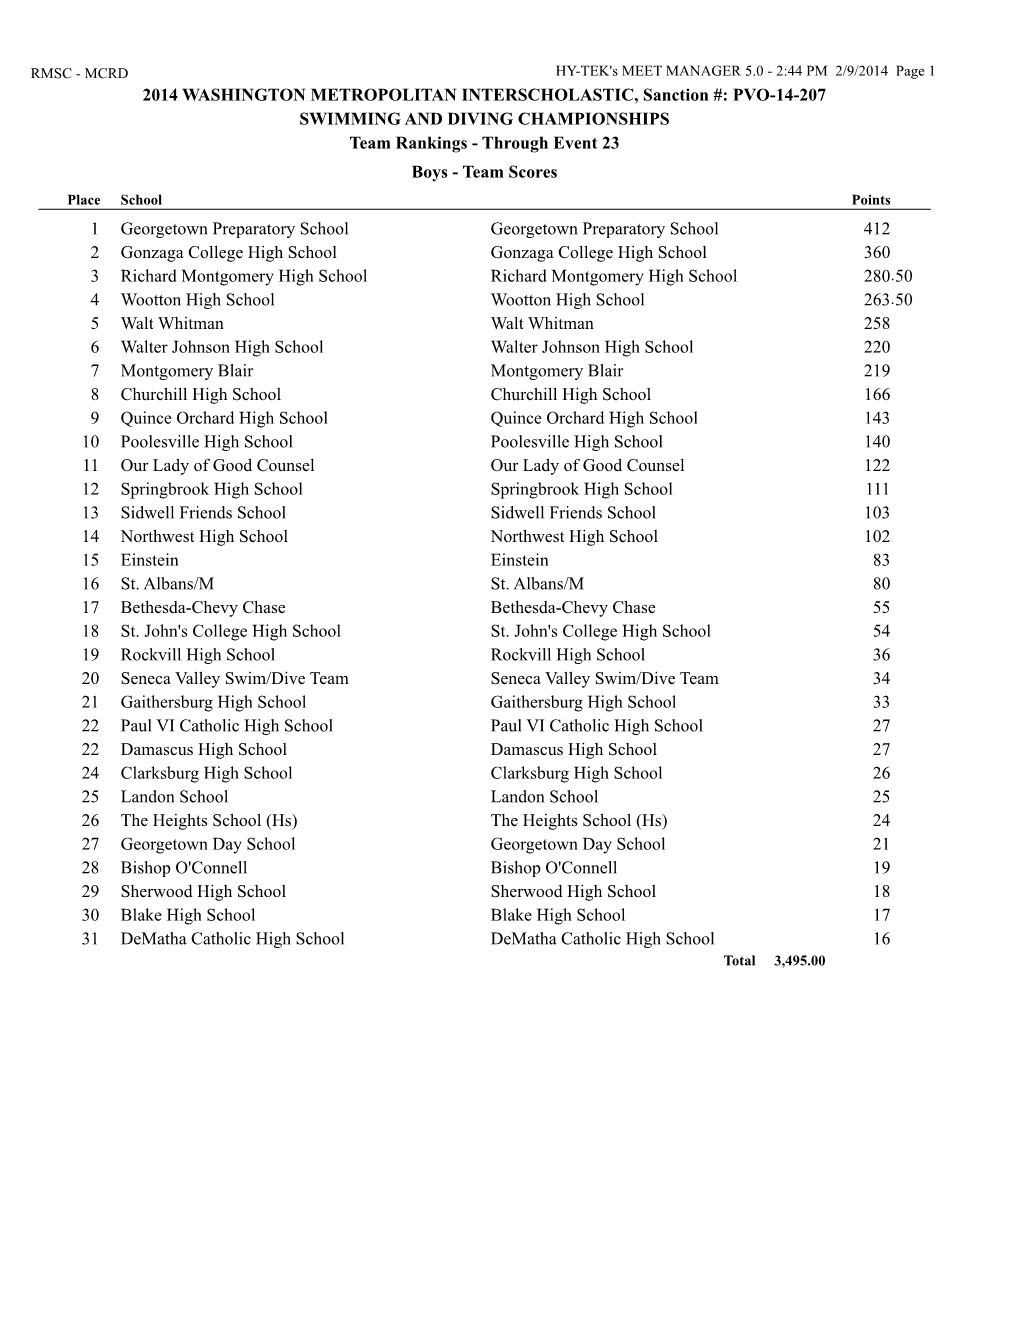 PVO-14-207 SWIMMING and DIVING CHAMPIONSHIPS Team Rankings